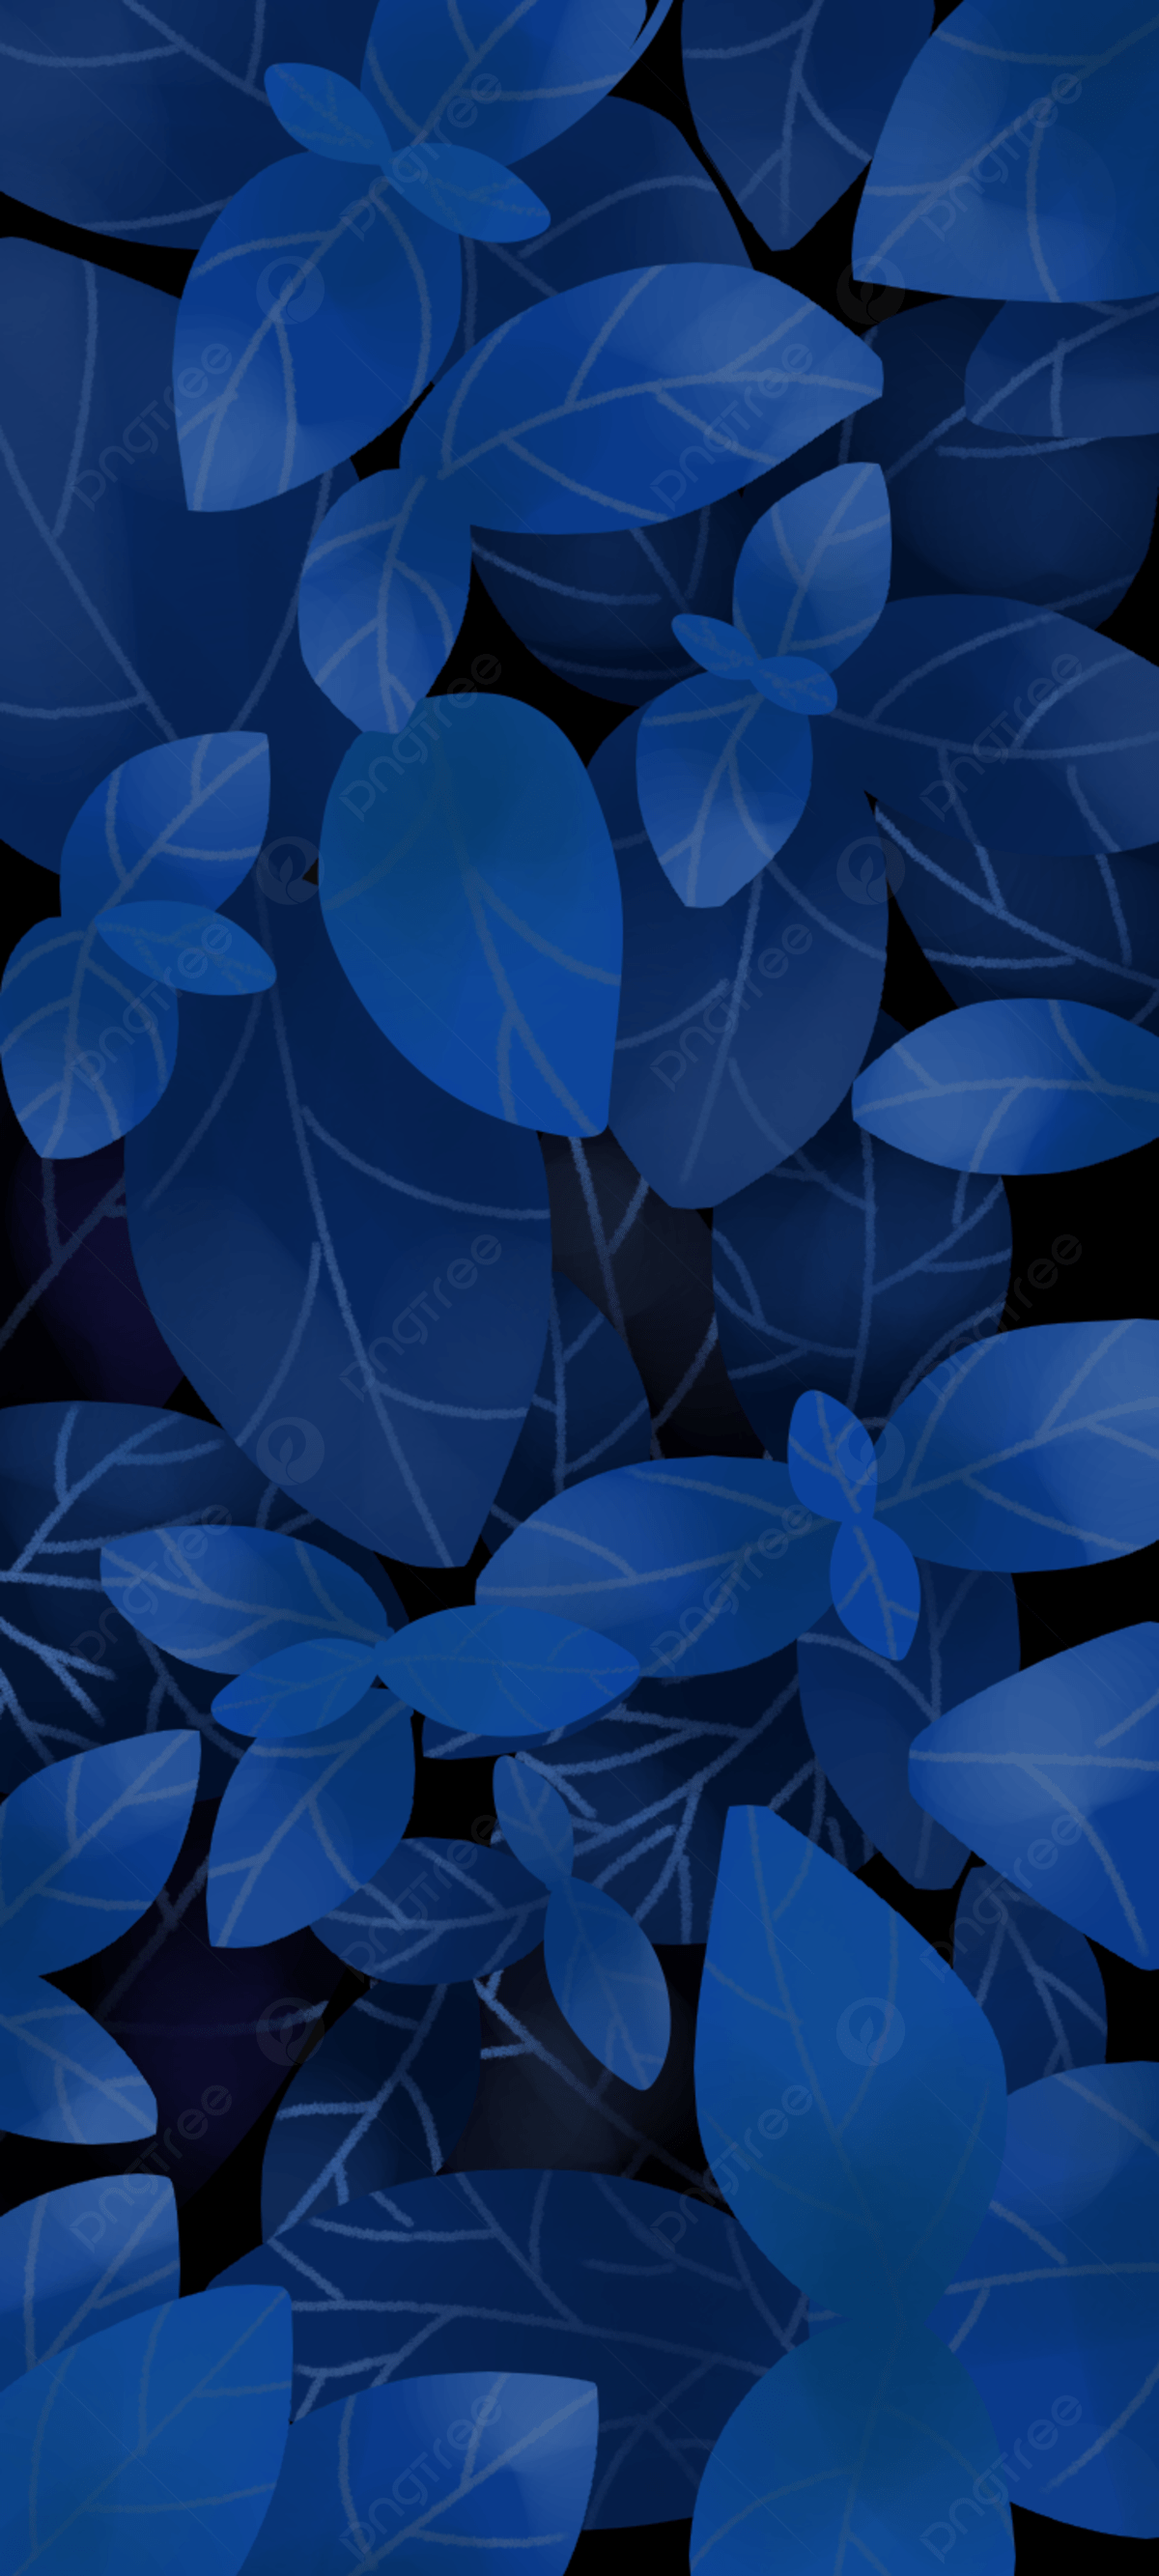 Aesthetic Blue Leaf Nature Wallpaper By One Art Background, Aesthetic Blue Leaf, Nature Wallpaper, Aesthetic Wallpaper Background Image for Free Download